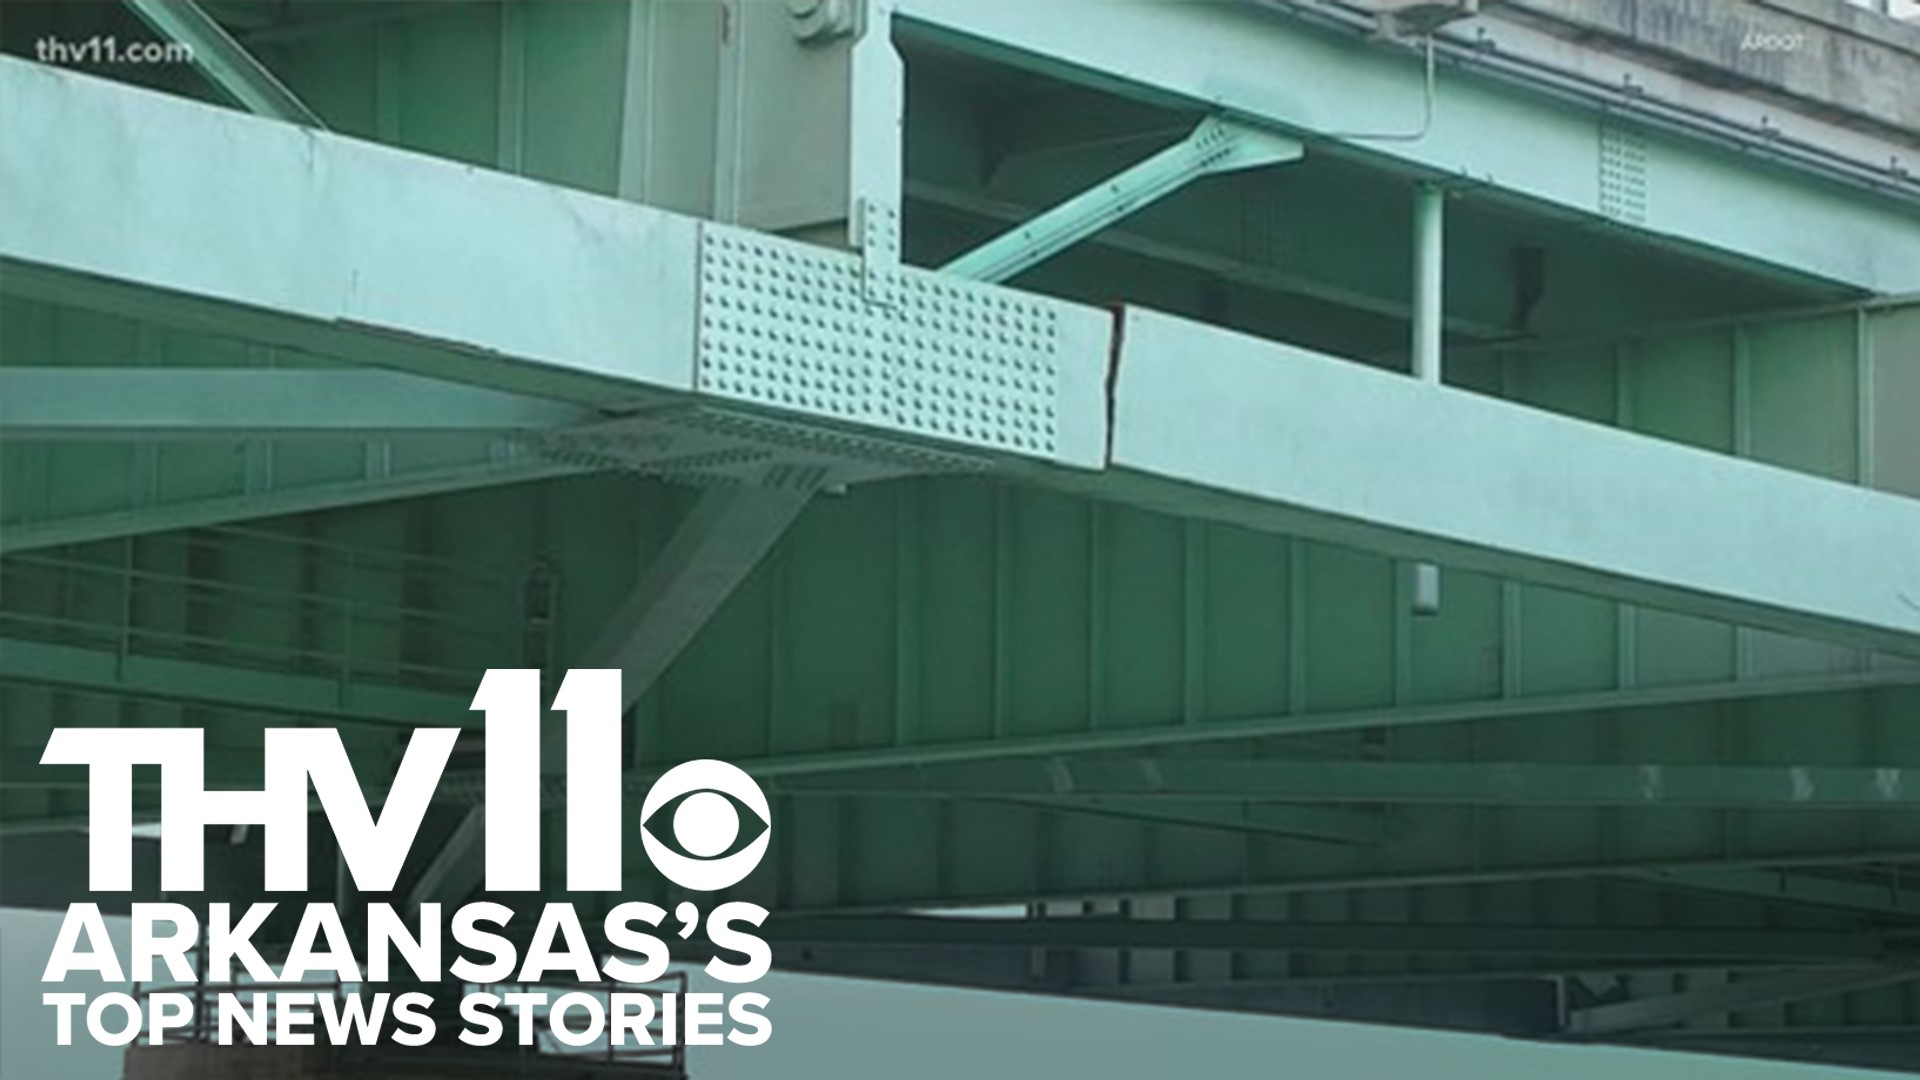 The U.S. Department of Transportation is out with its report on the inspection into the I-40 bridge crack. Fifty-five homicides have occurred in Little Rock in 2021.